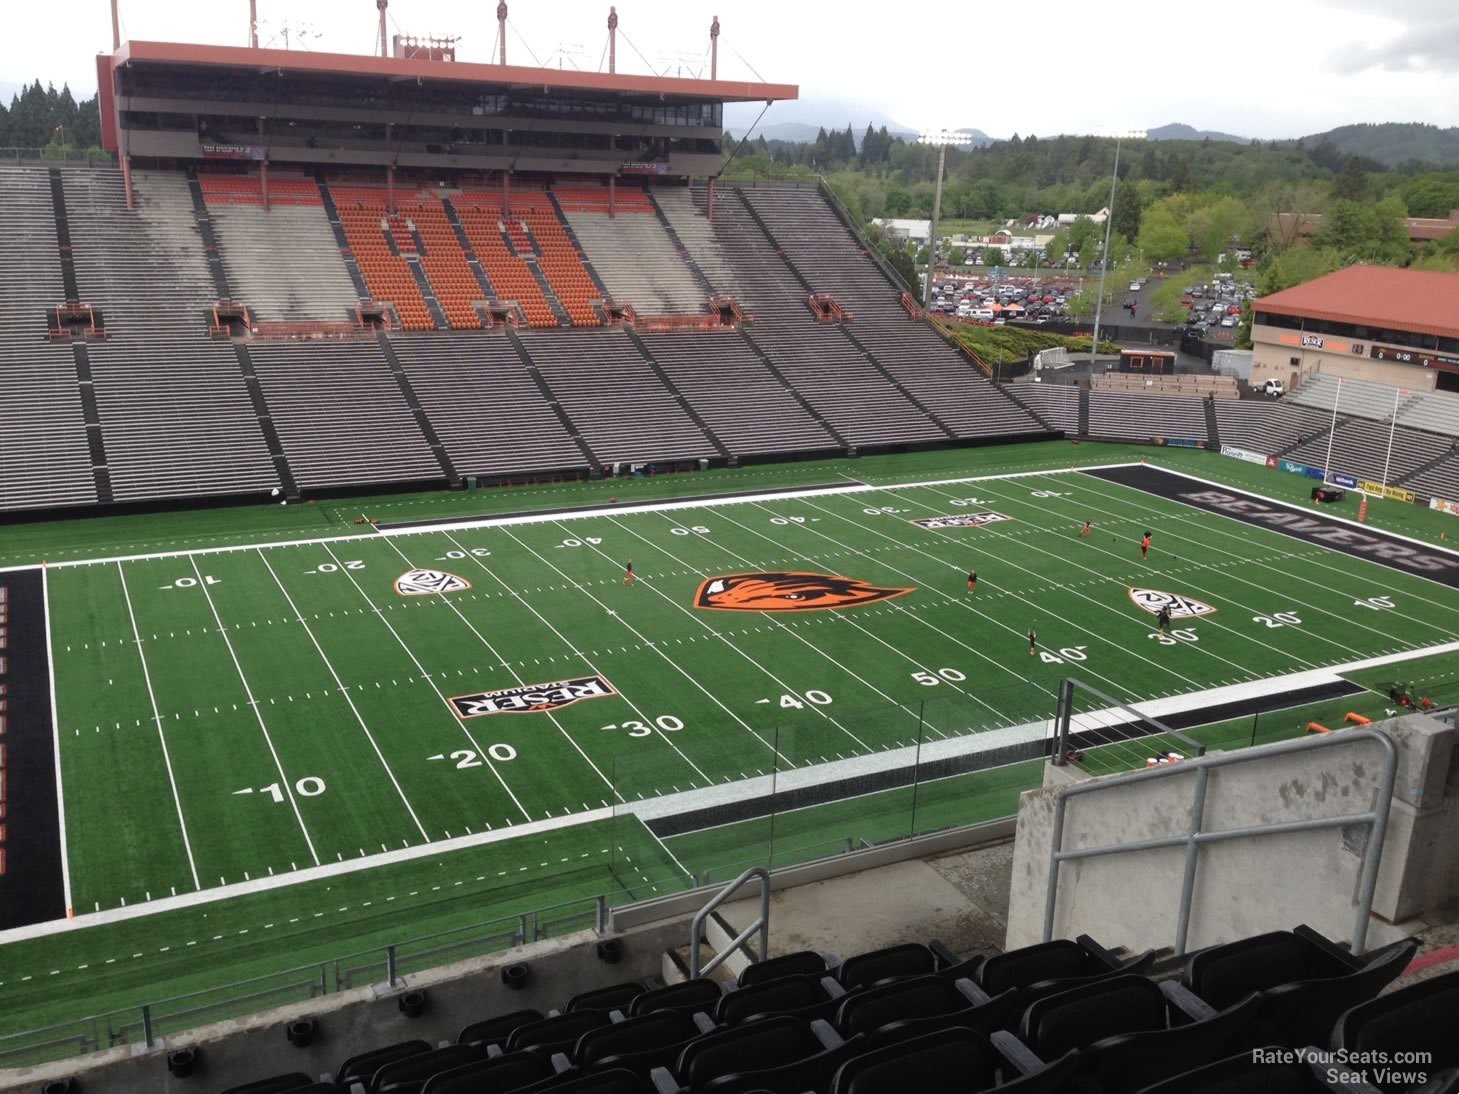 section 224, row 19 seat view  - reser stadium